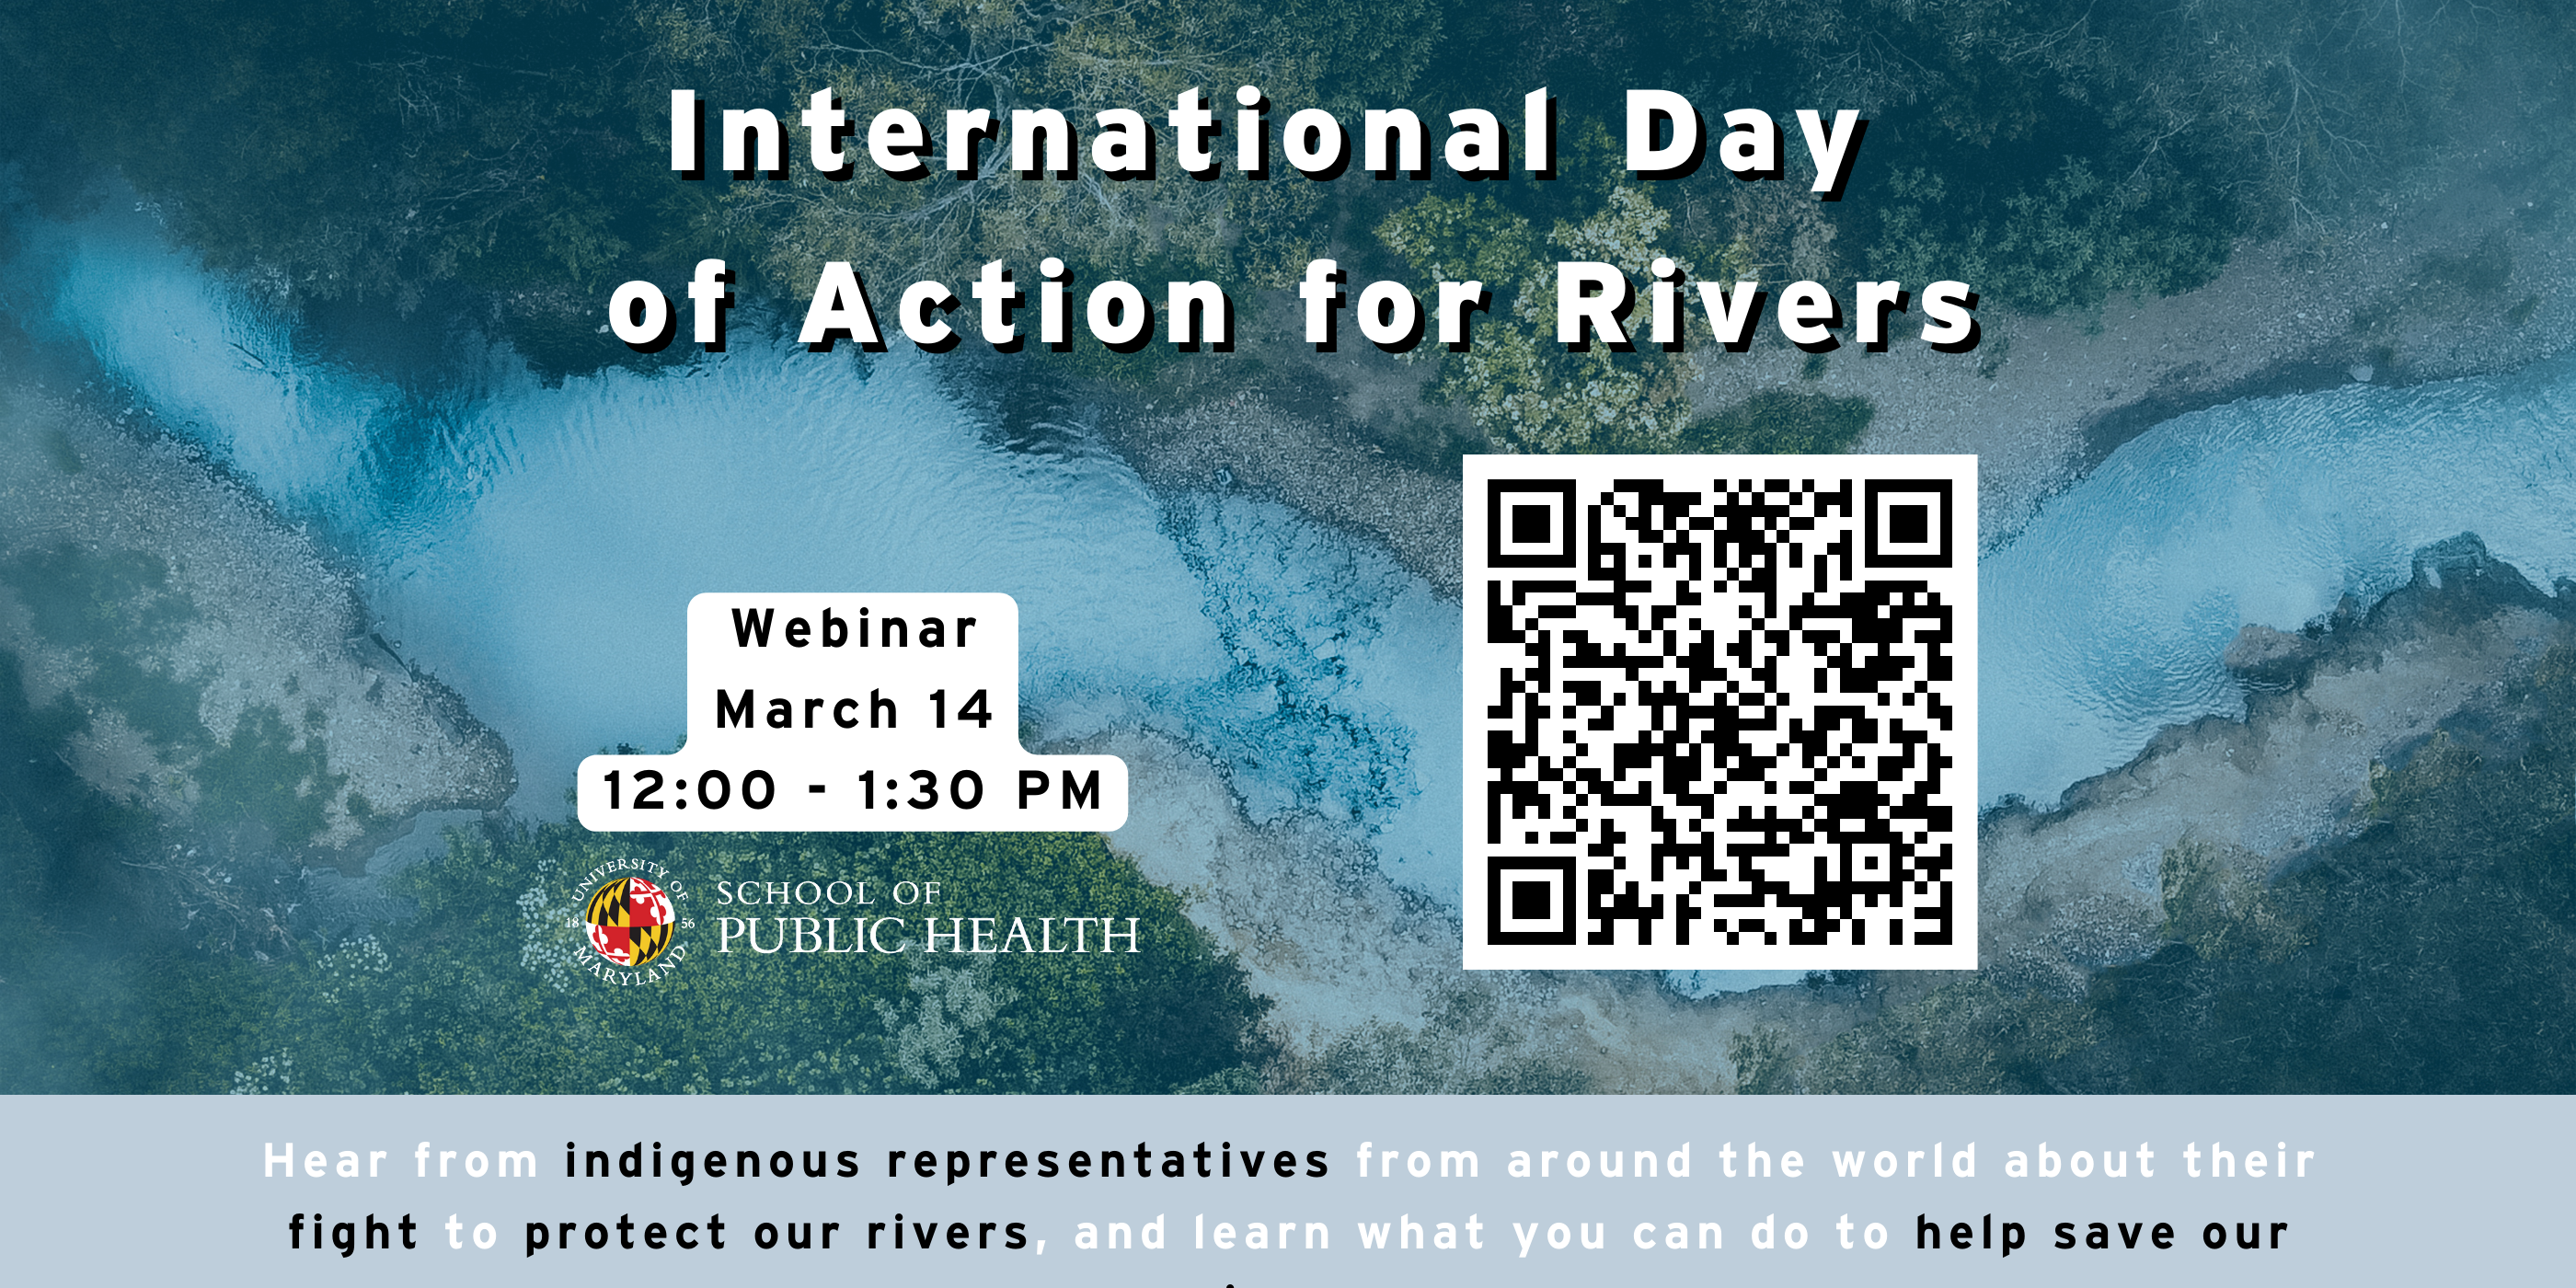 Webinar flyer with a birds eye view of a river as the background